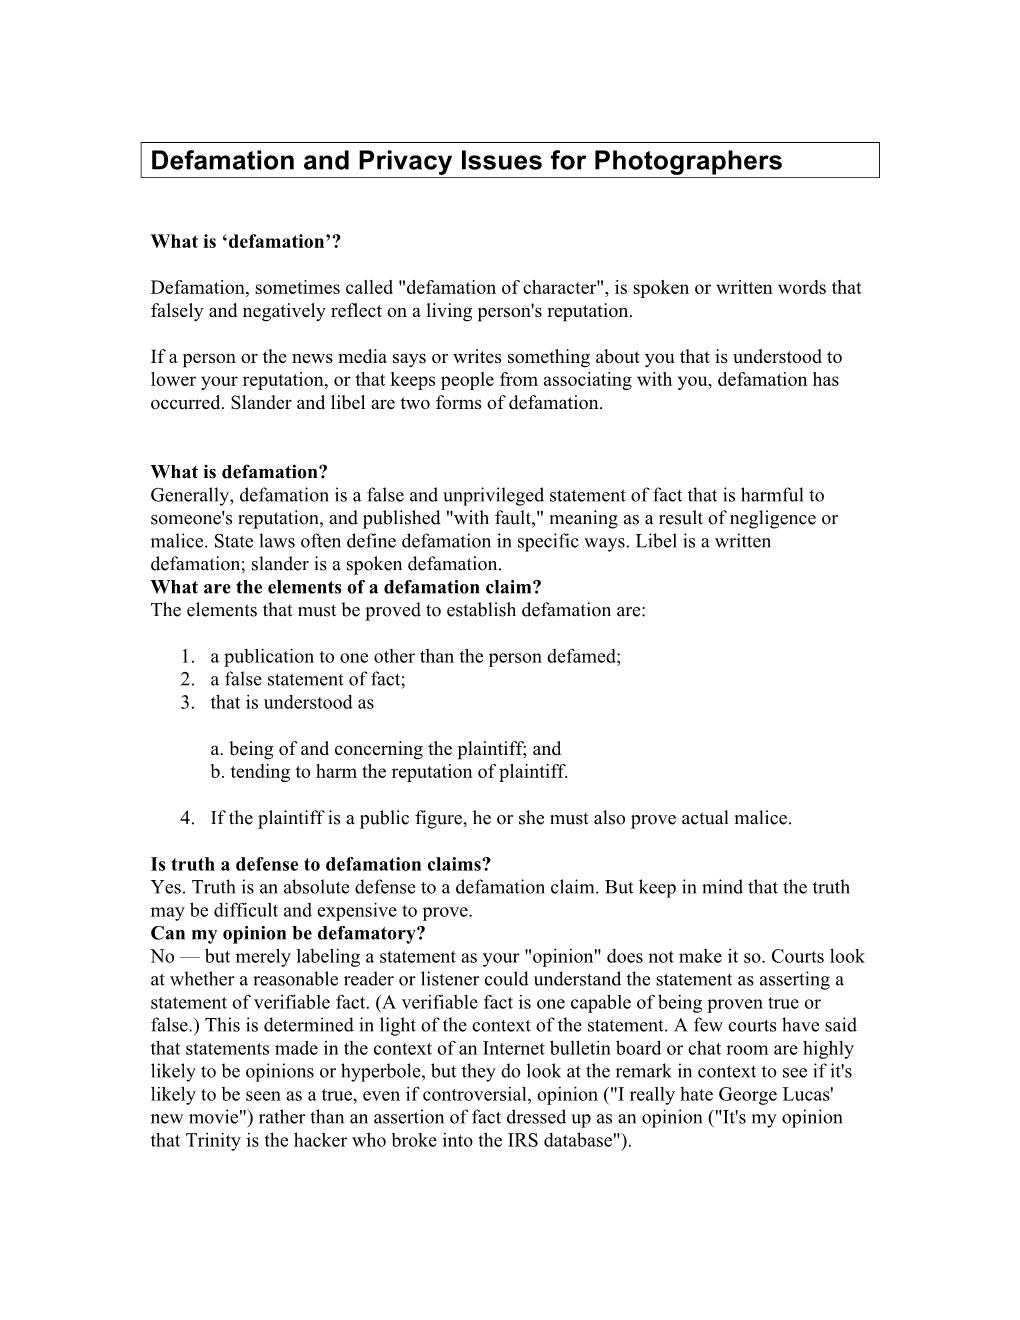 Defamation and Privacy Issues for Photographers